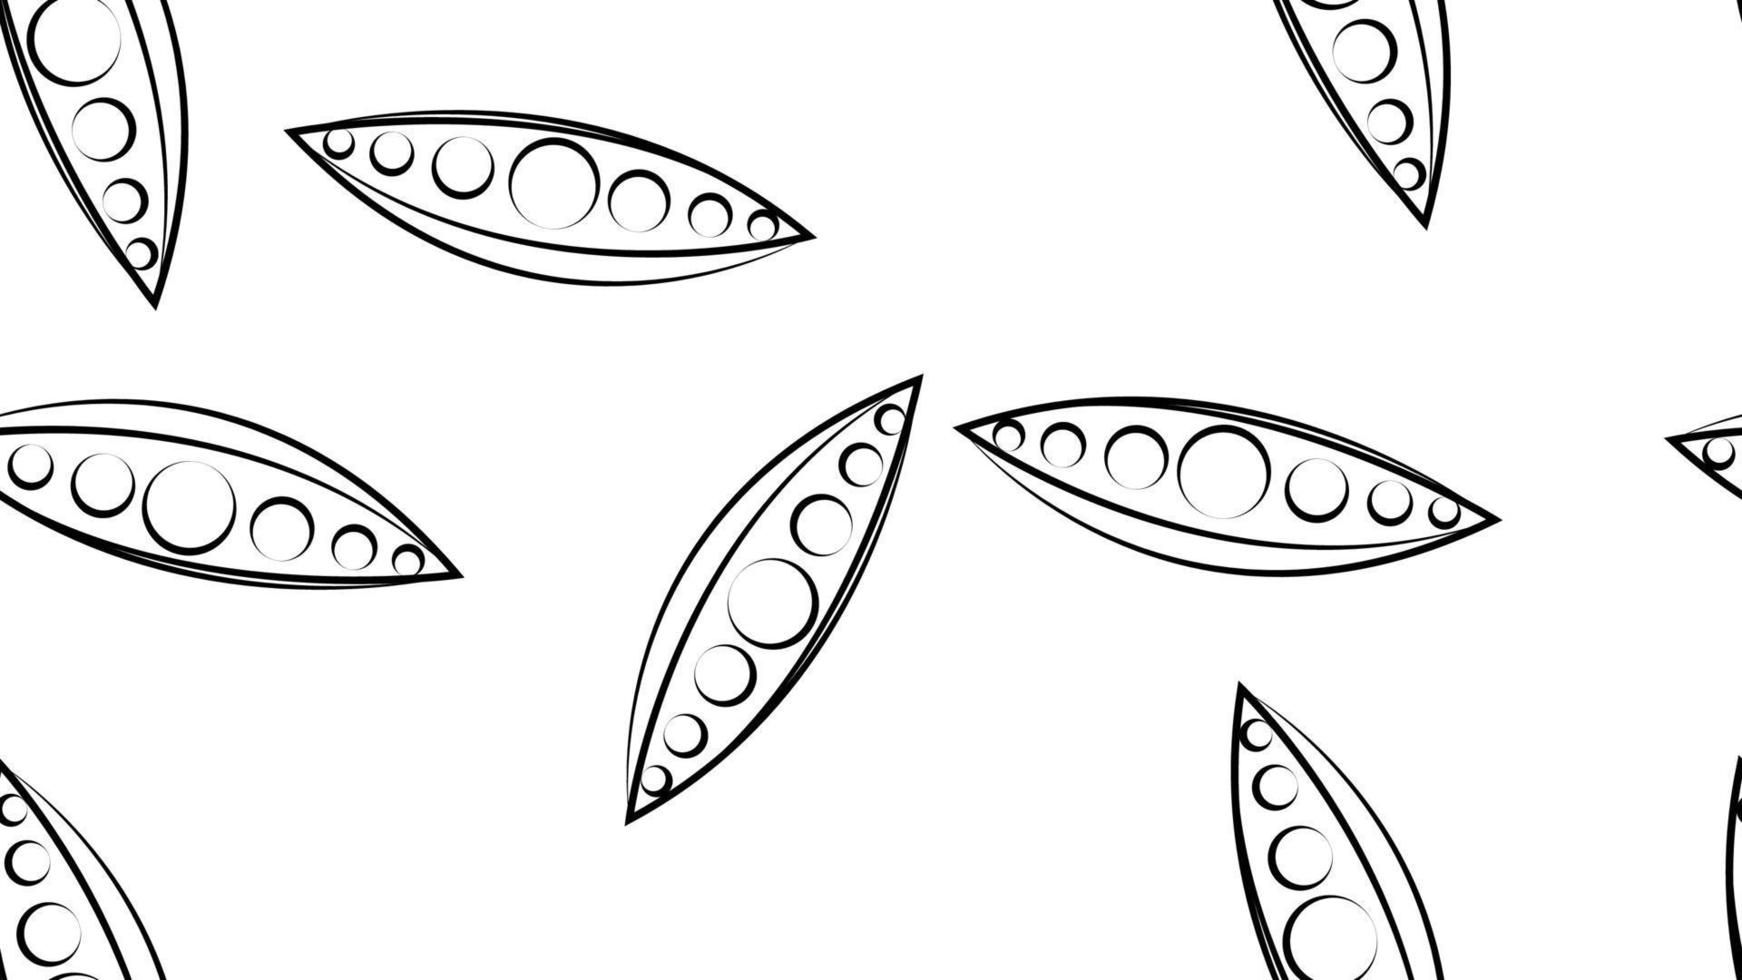 green peas on a white background, vector illustration, pattern. peas in a pod, inside are small round peas. black and white illustration, image of peas, wallpapers